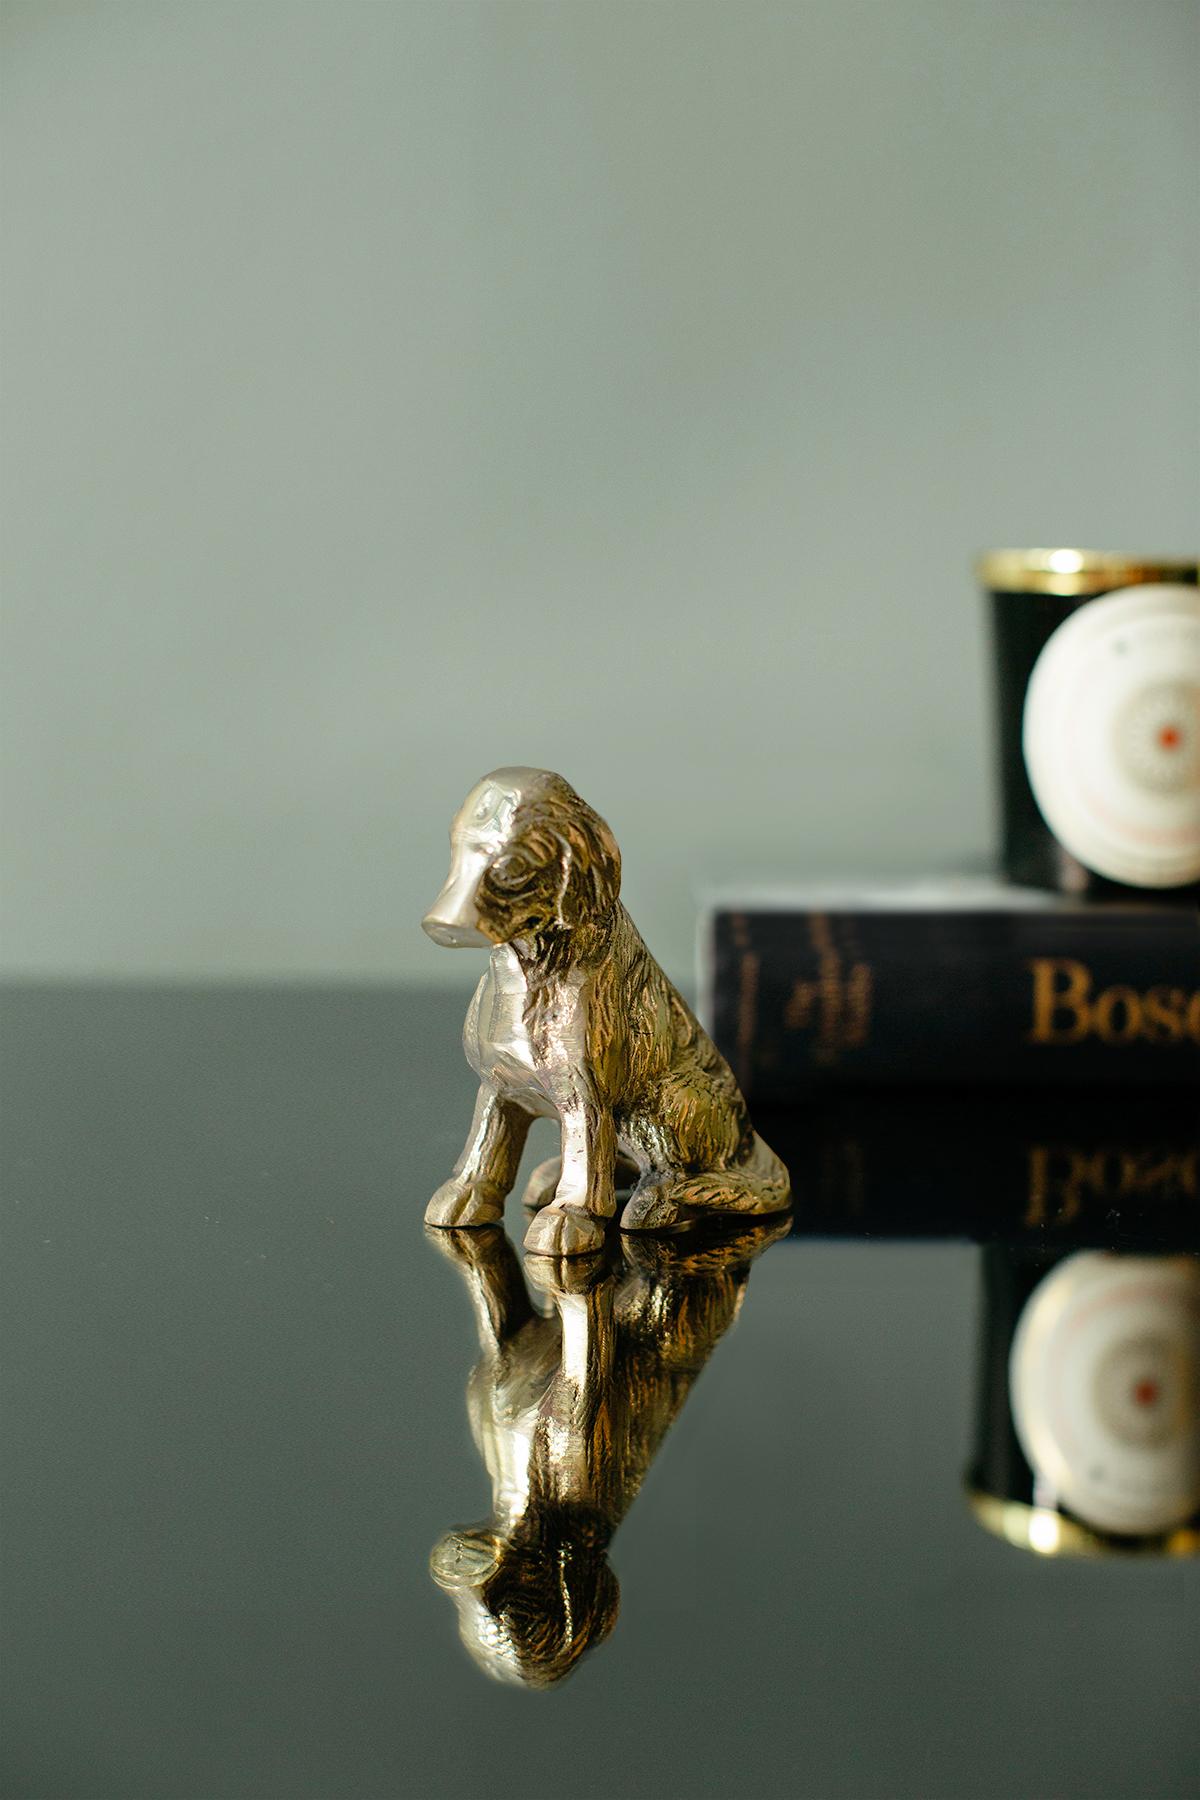 -Brass decorative object in a dog form.
-It would be a very nice, small collectable object for your interiors.

BRASS USE AND CARE
Clean surfaces with a dry cloth.
Minimize humidity and conditions that attract humidity.
Ensure surfaces are dry after